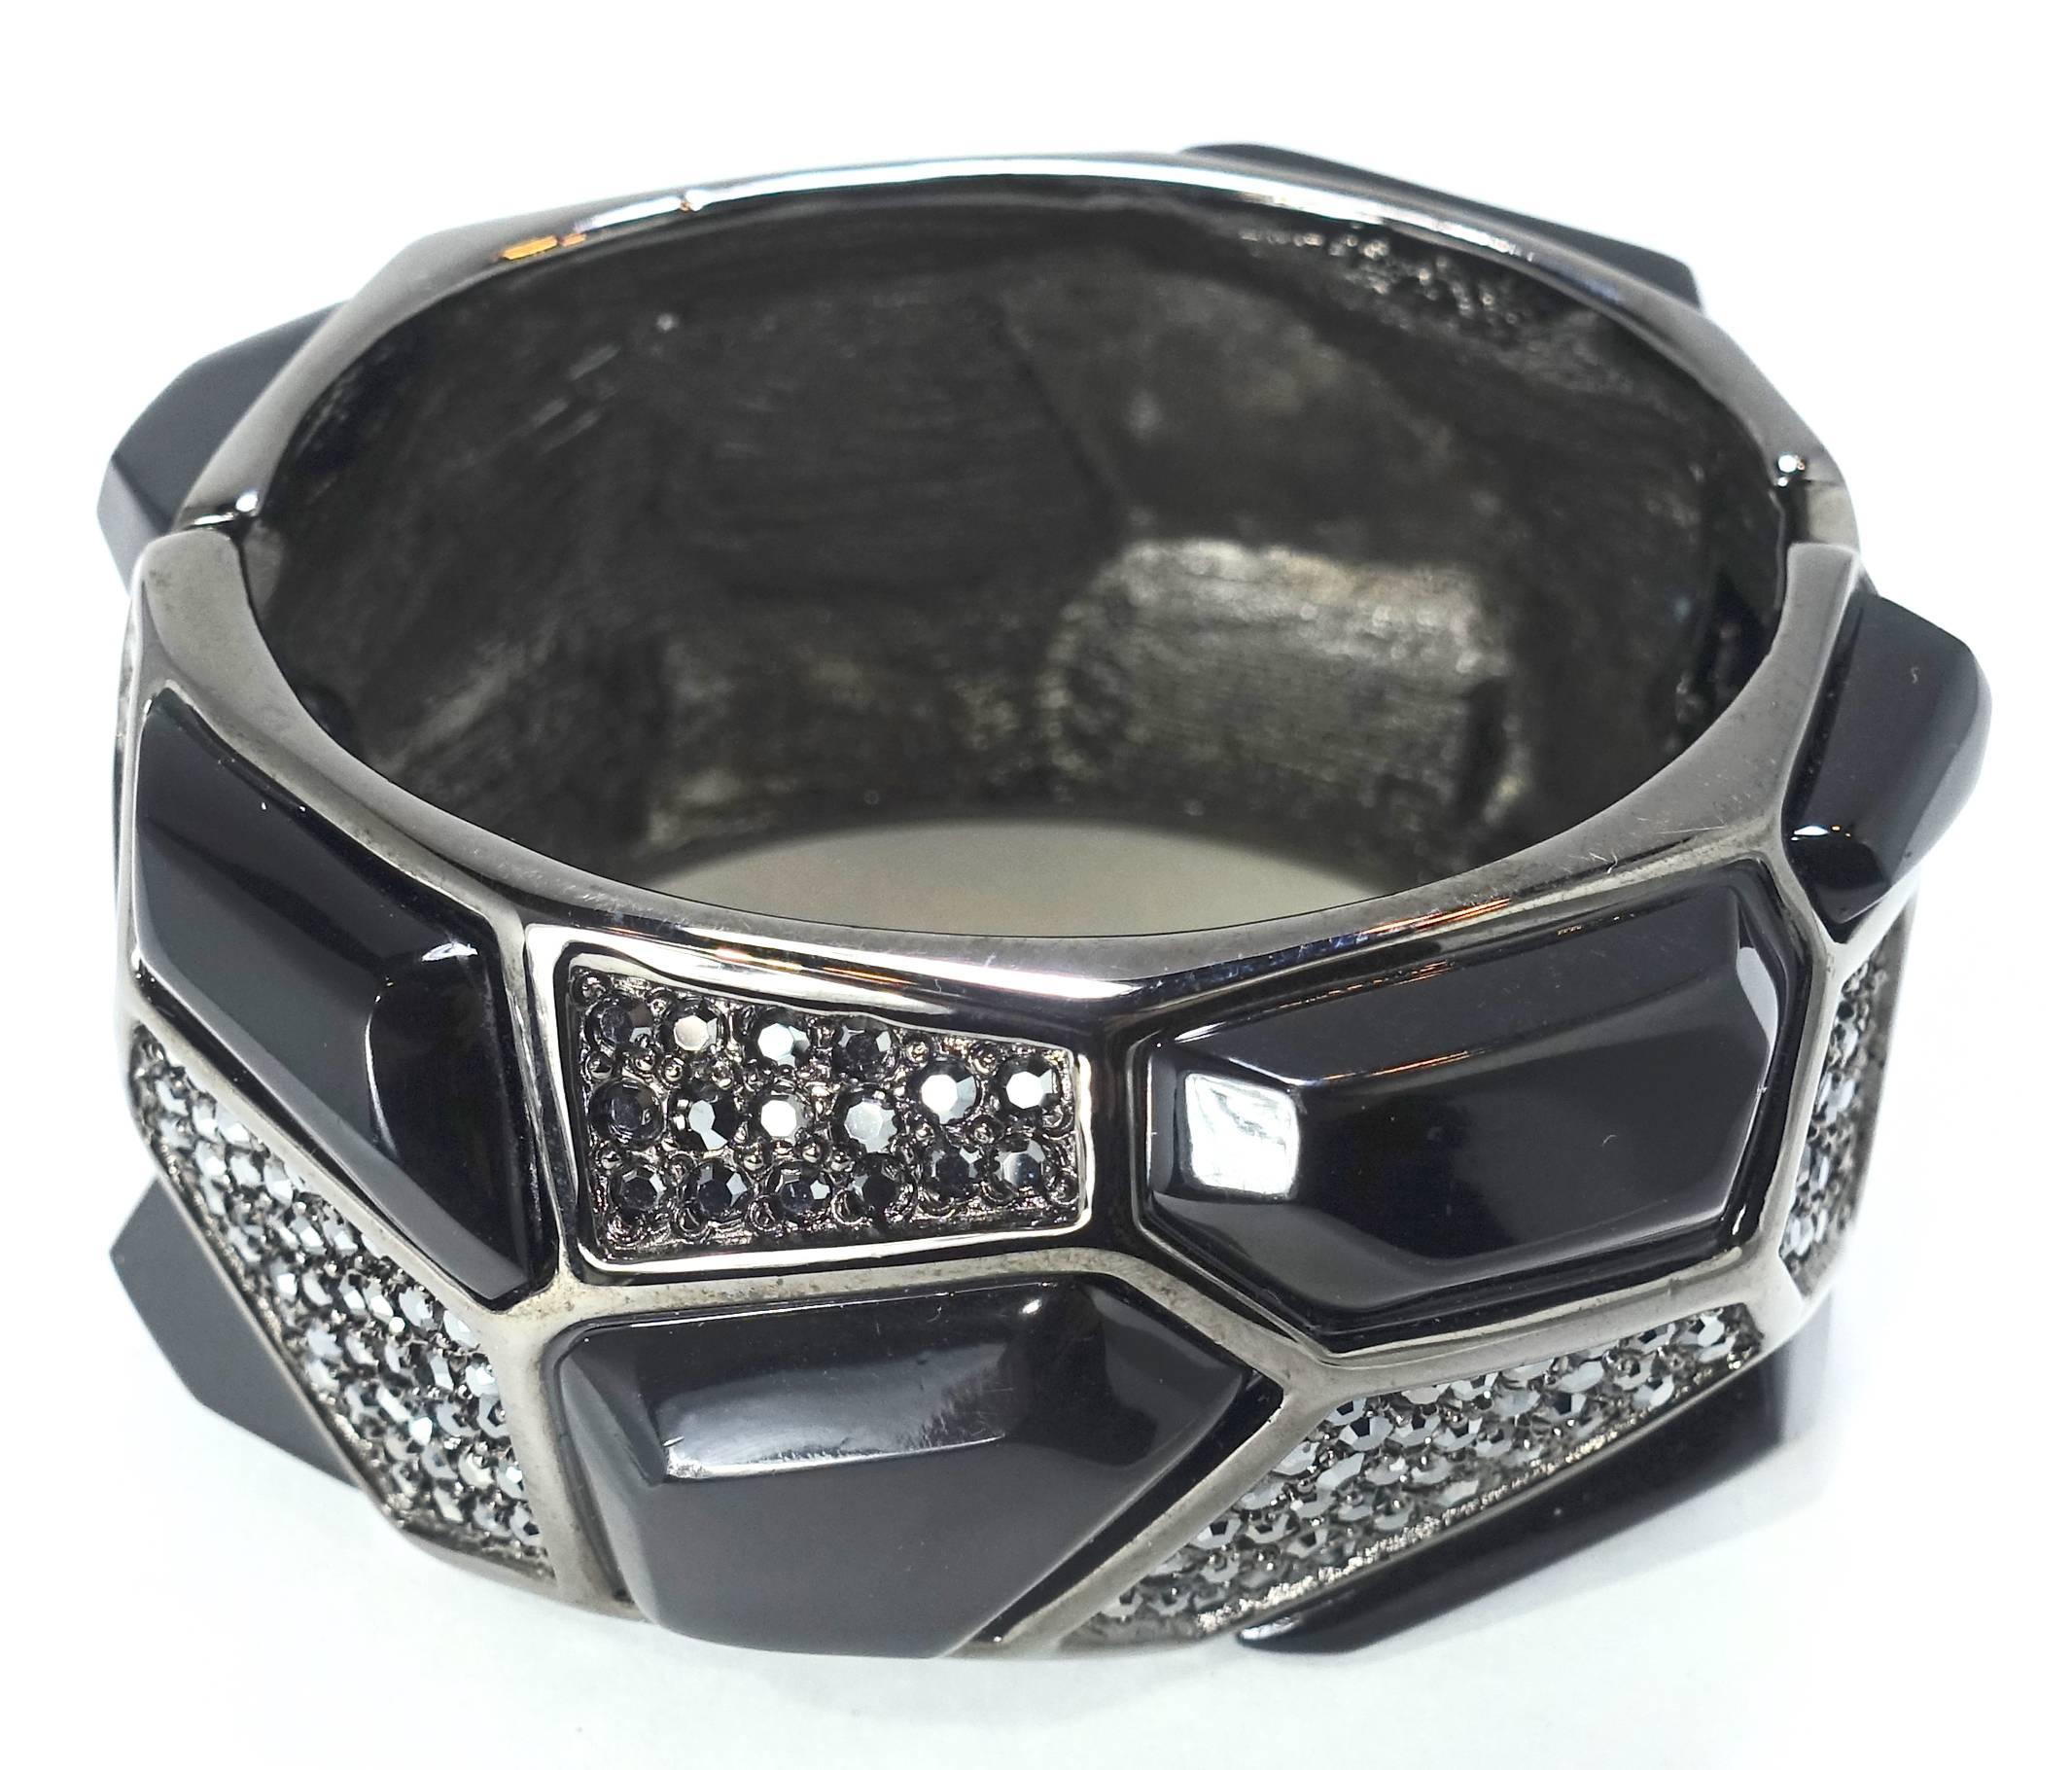 This Kenneth Jay Lane clamper bracelet has large different shaped black stones with black rhinestone accentuating the bracelet inn-between in a Japanned setting.  This clamper bracelet measures 6-1/2” around the inside x 1-5/8” wide and is signed